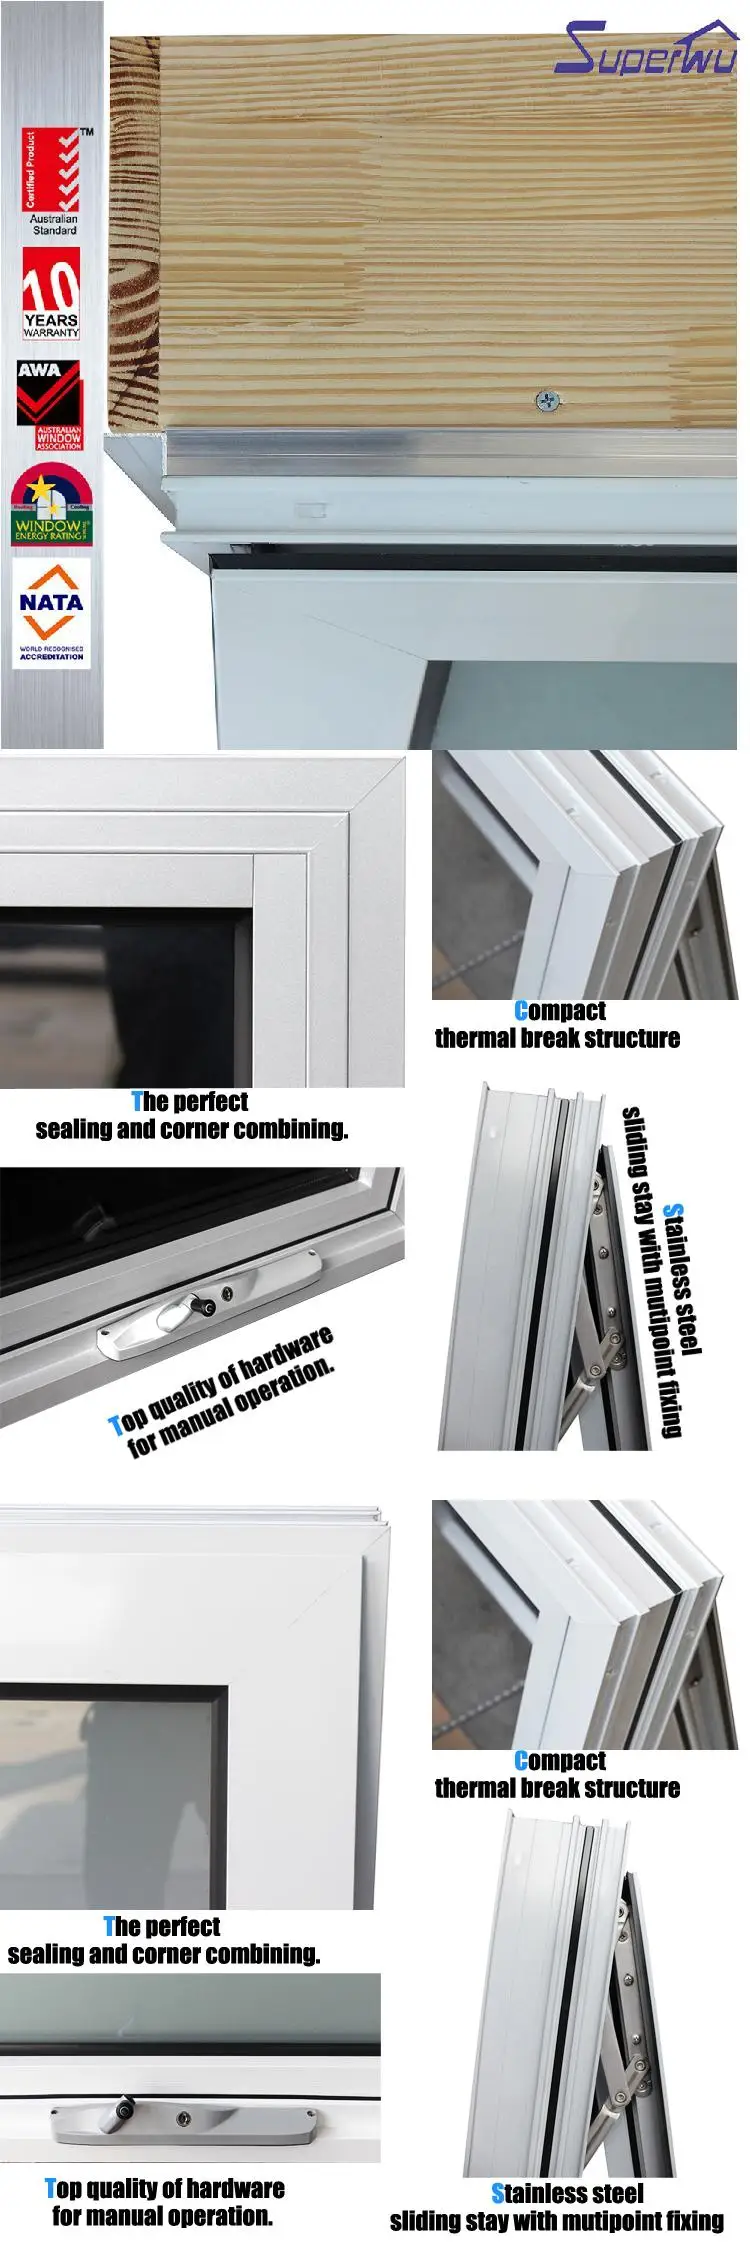 Fixed windows for daylighting in walkways and stairwells, at a favorable price